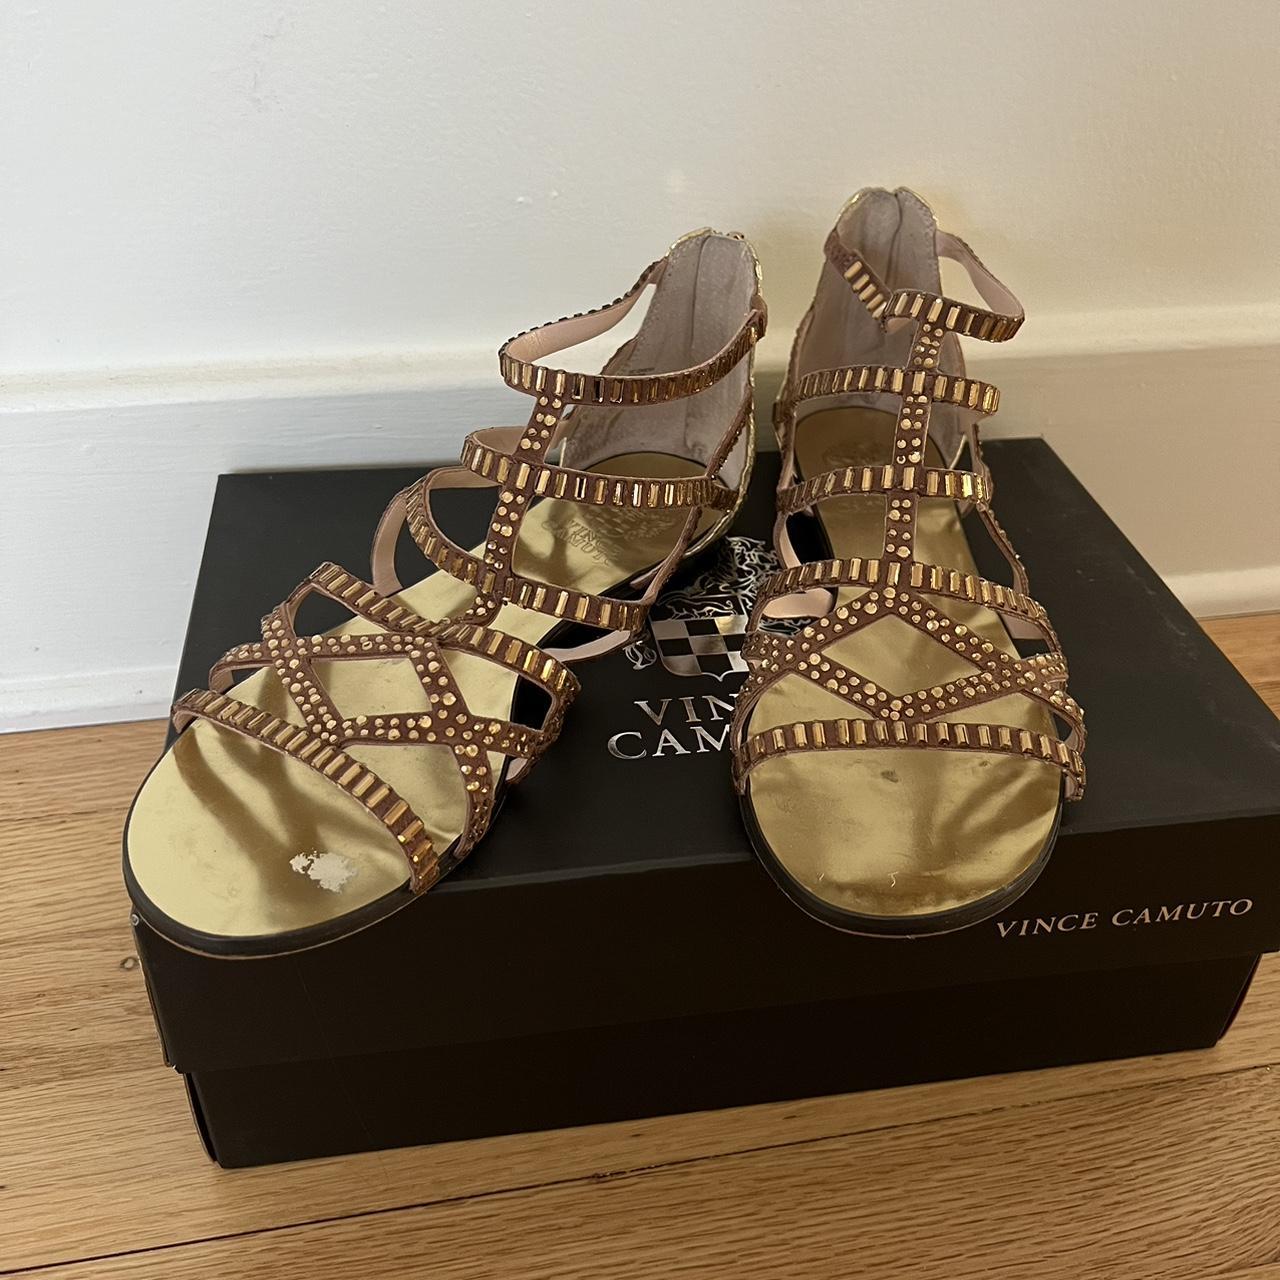 Vince Camuto Women's Tan and Gold Sandals